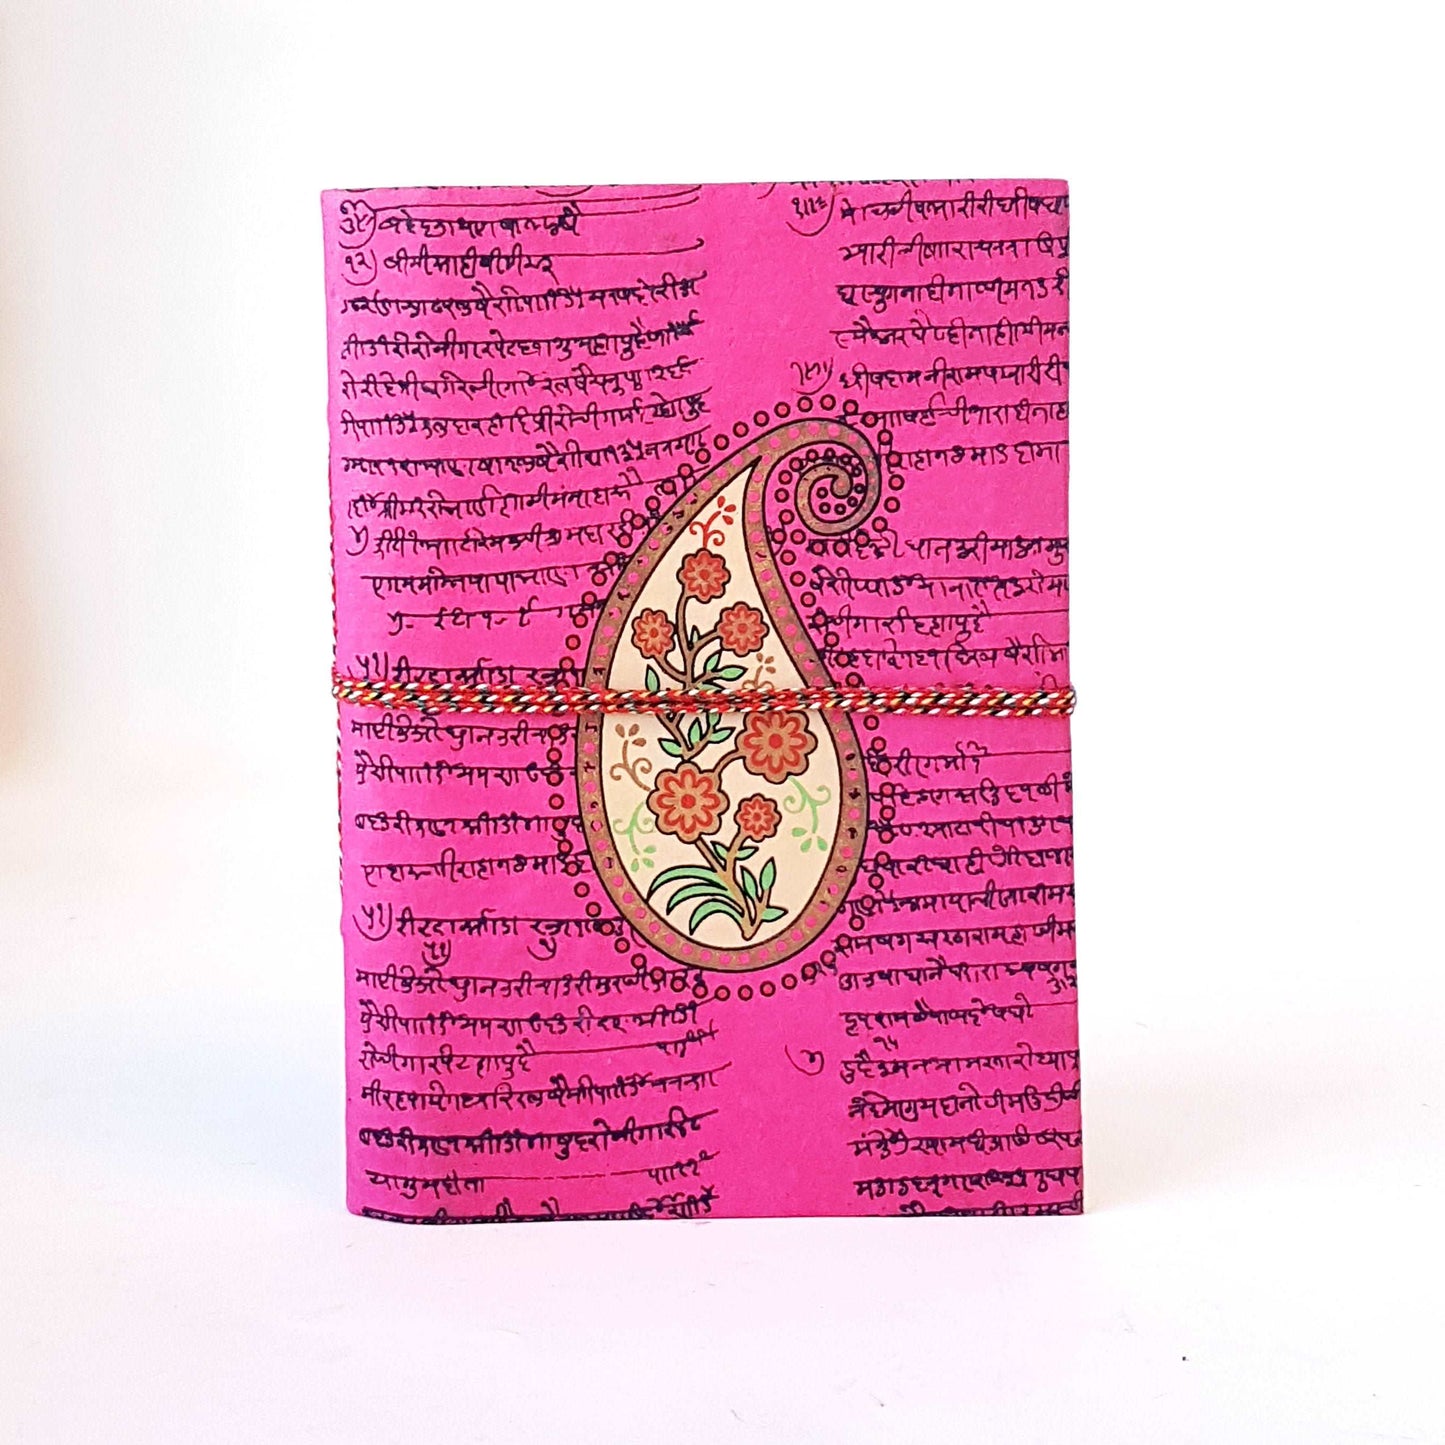 Blank notebook with fushia pink floral paisley design cover 6x8 inch. Use as sketchbook, bullet journal, diary. Premium handmade paper.